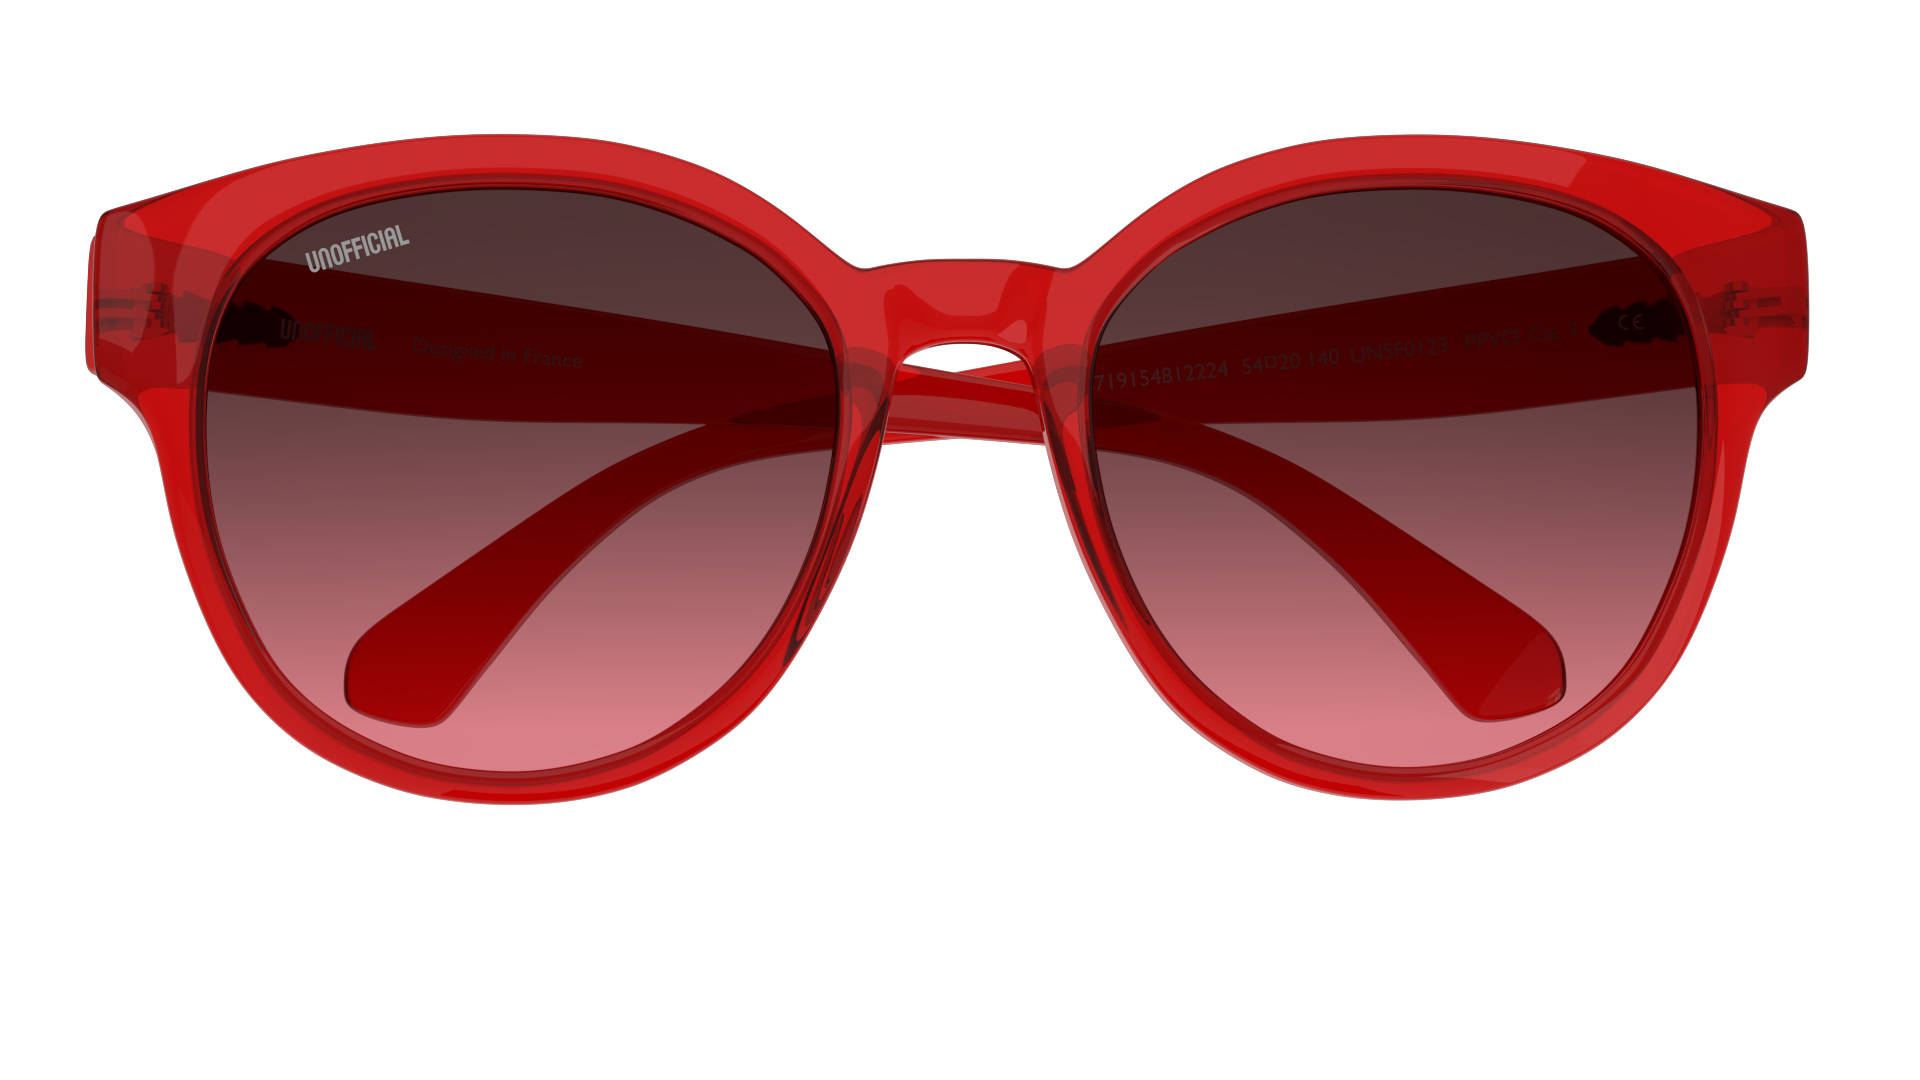 Folded Unofficial UNSF0123 (PPV0) Sunglasses Violet / Transparent, Red